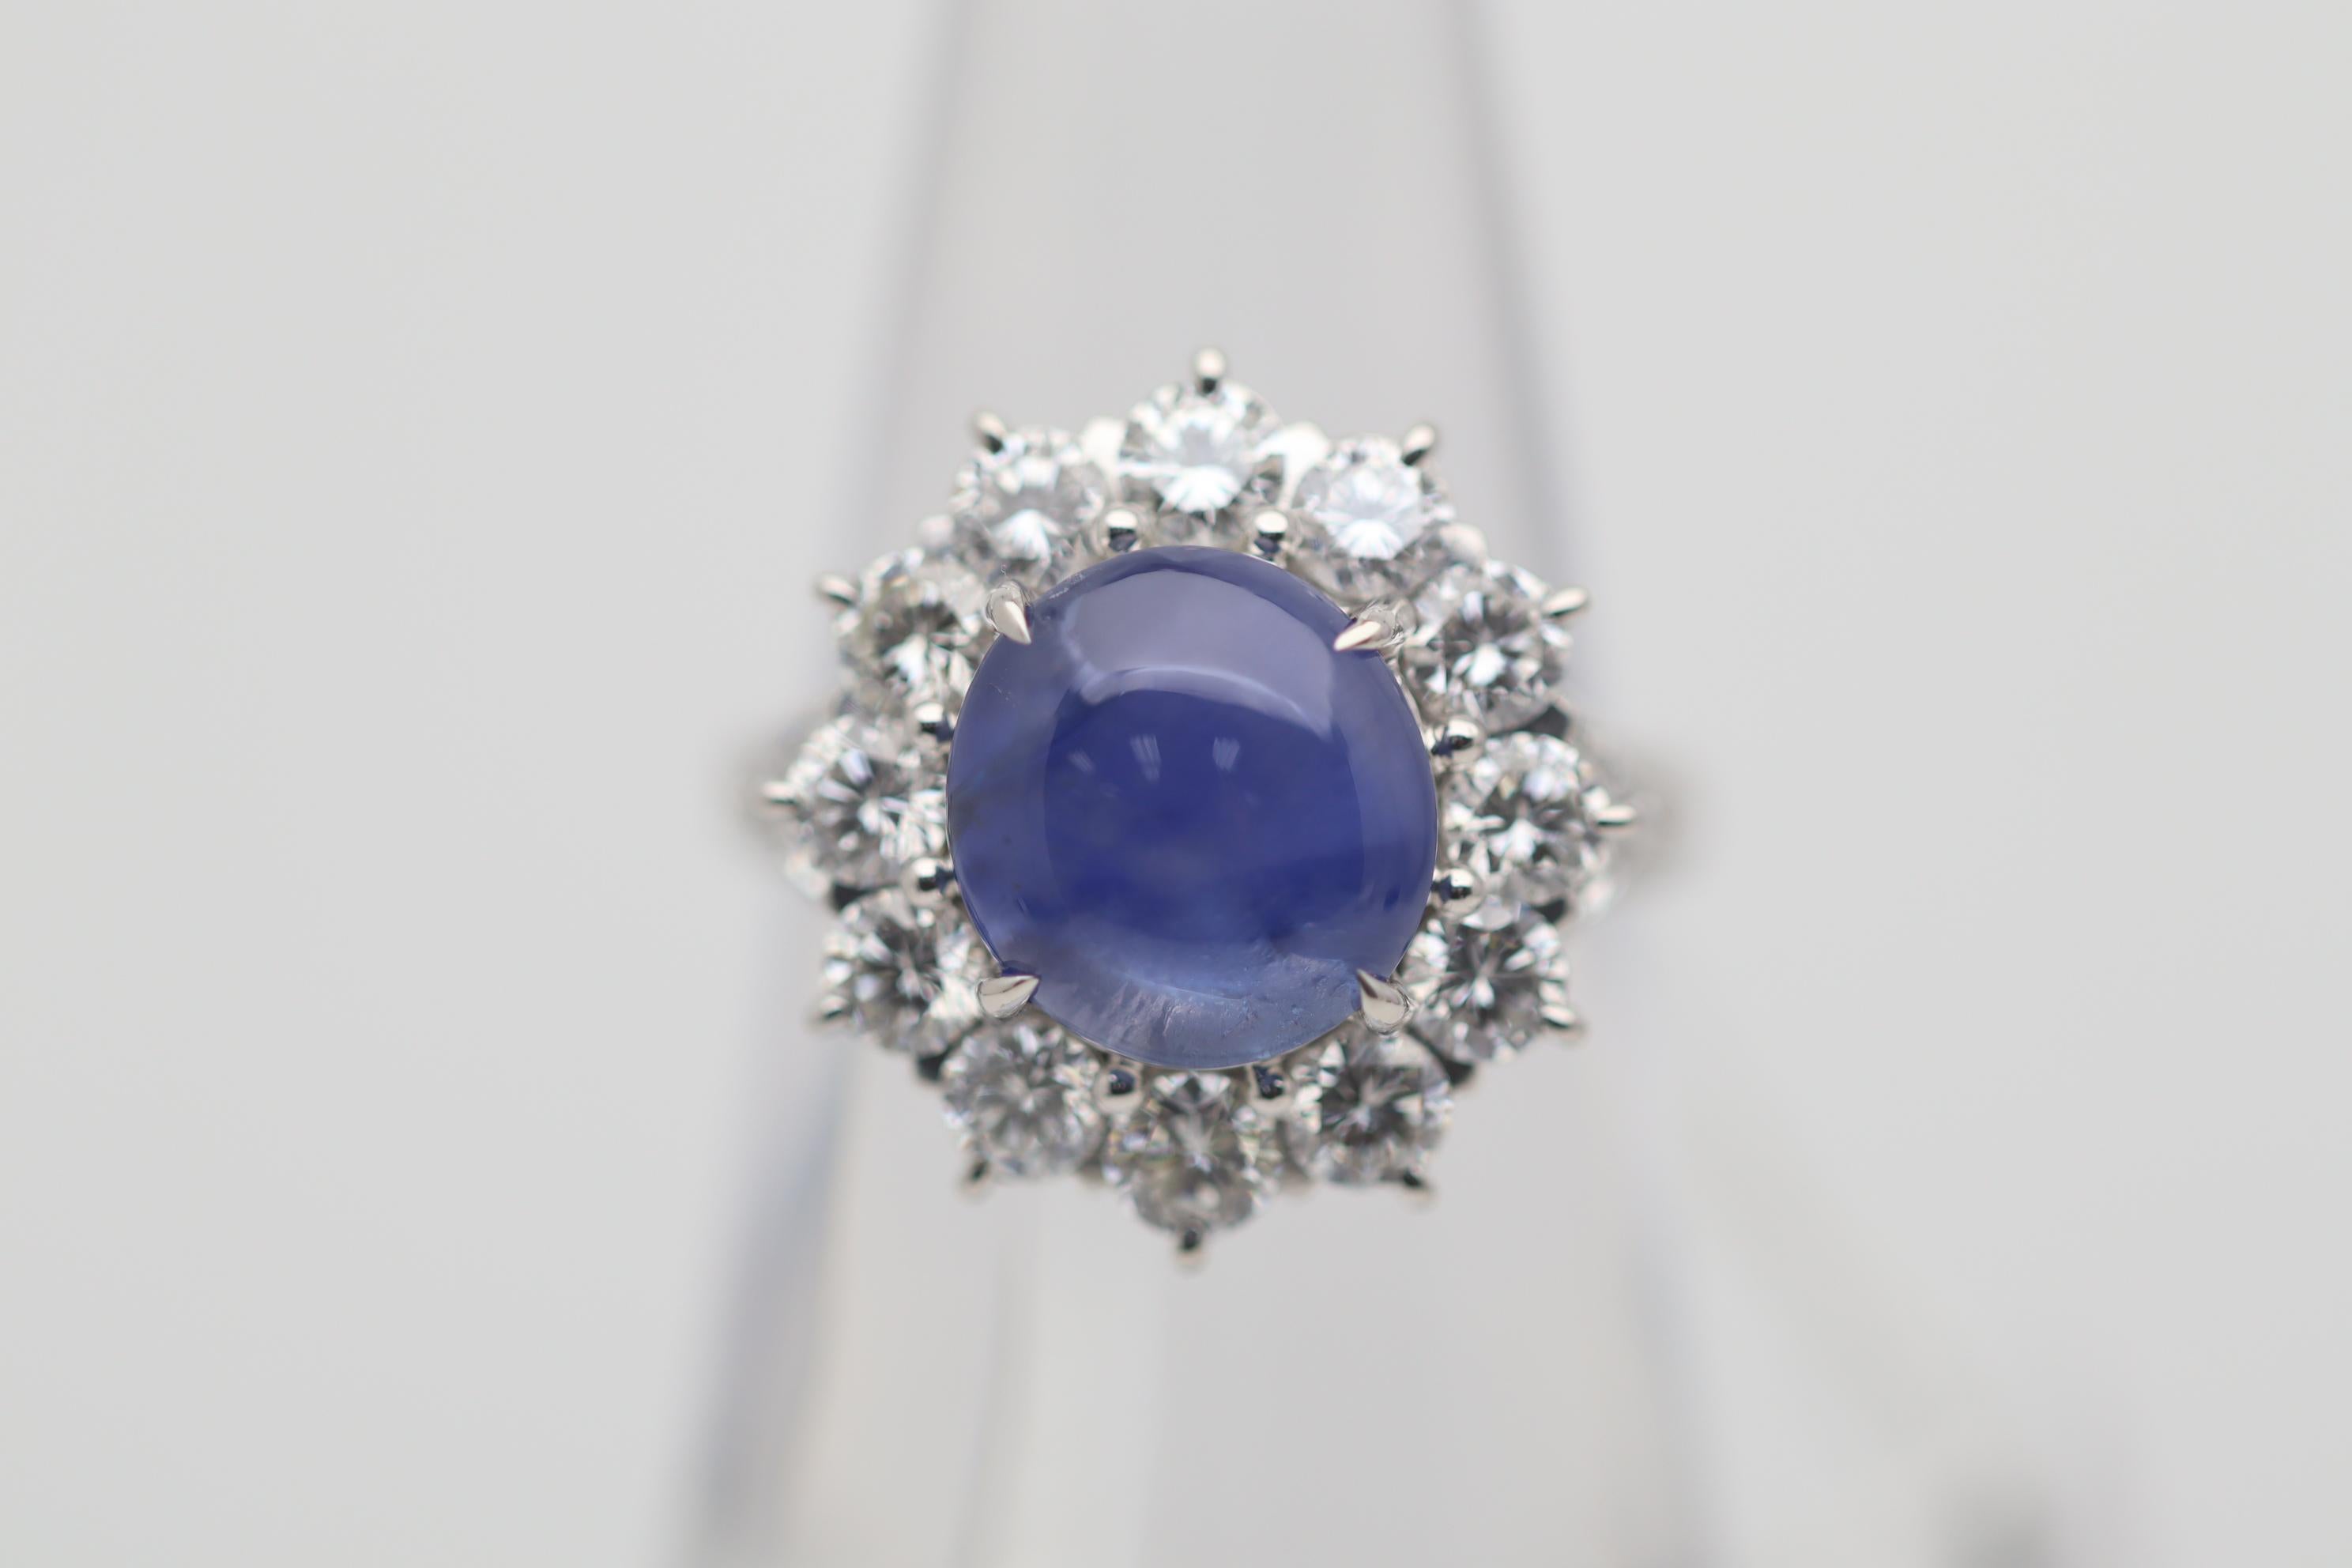 A very fine example of a blue star sapphire. It weighs 5.01 carats and has the most amazing gem blue color. Adding to that, it has a strong 6-rayed star when a light hits its stop adding to its beauty. Haloing the sapphire are 1.78 carats of large